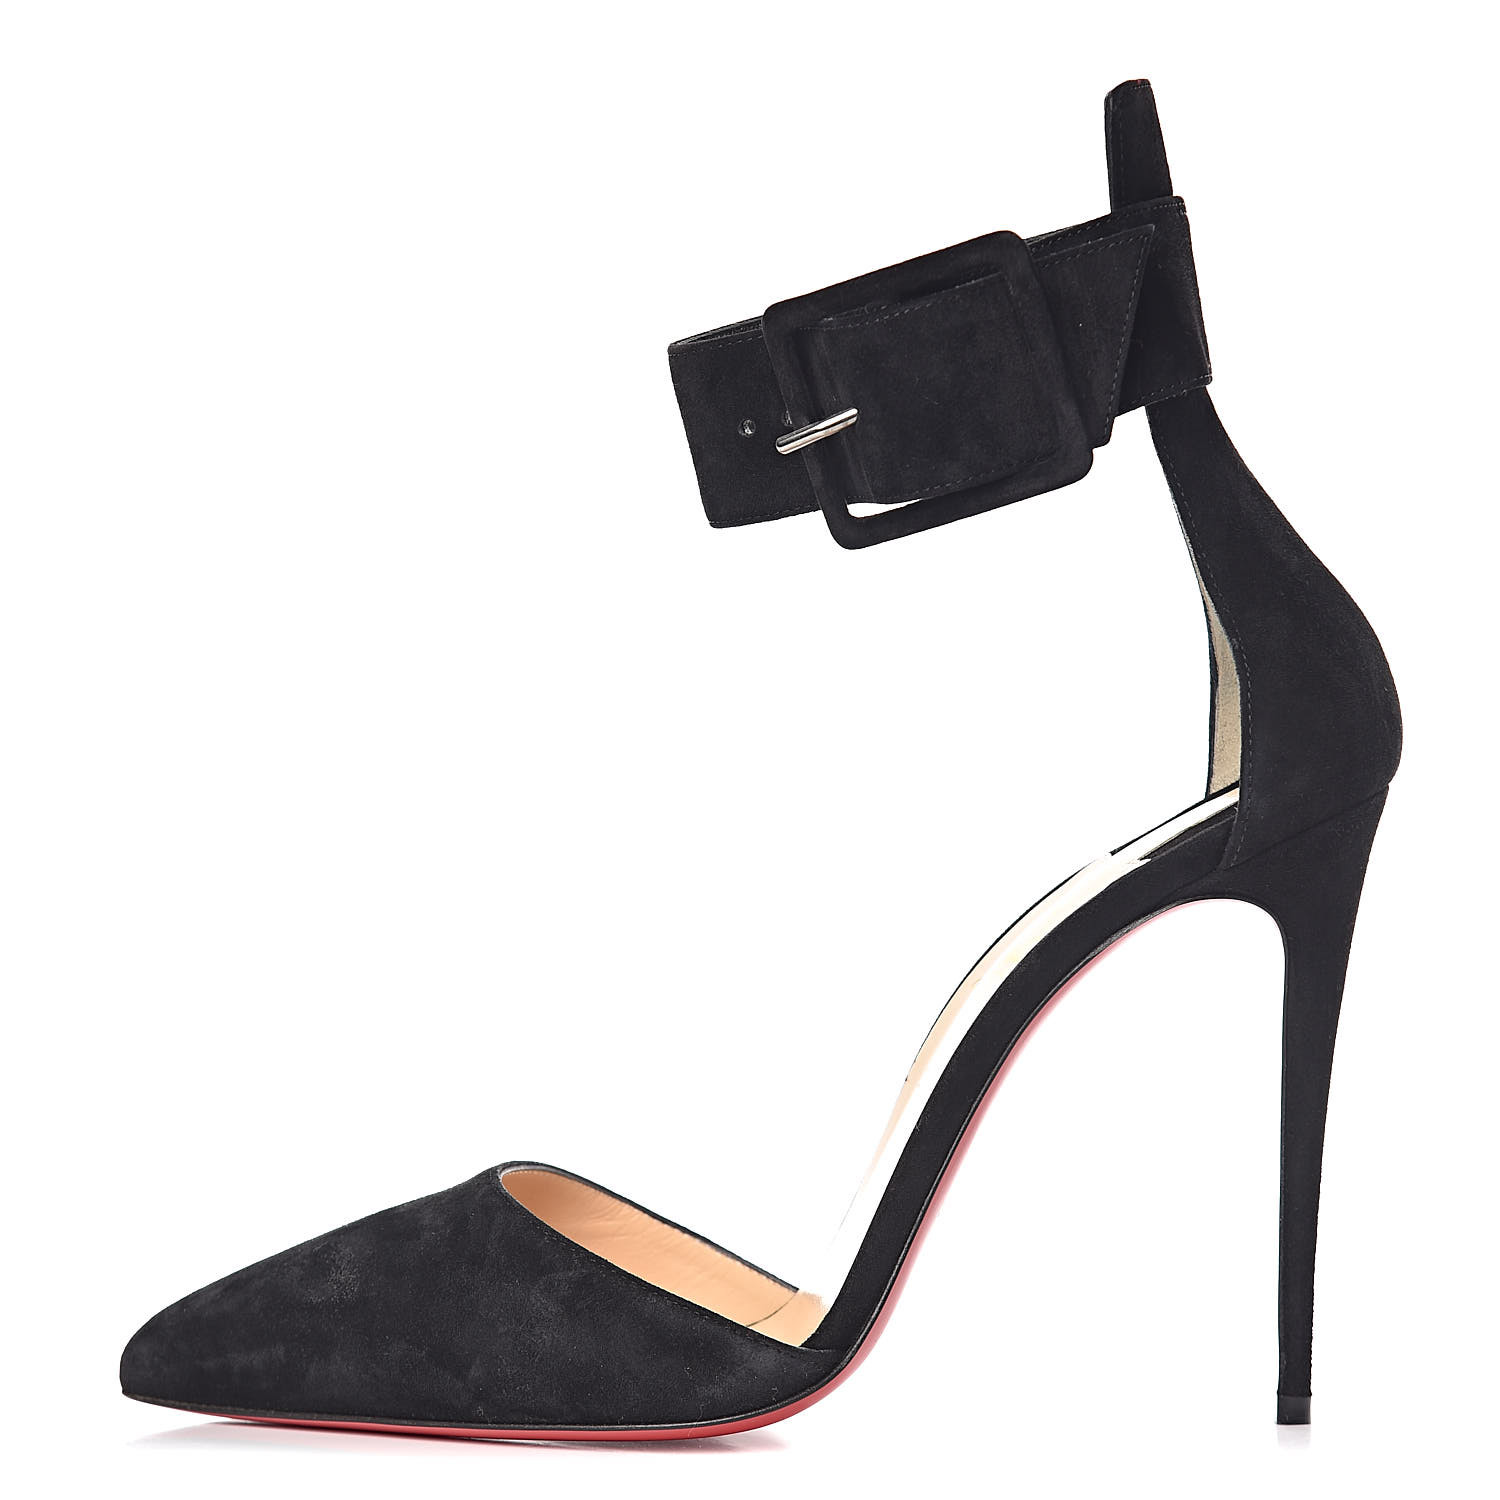 black louboutin heels with ankle strap